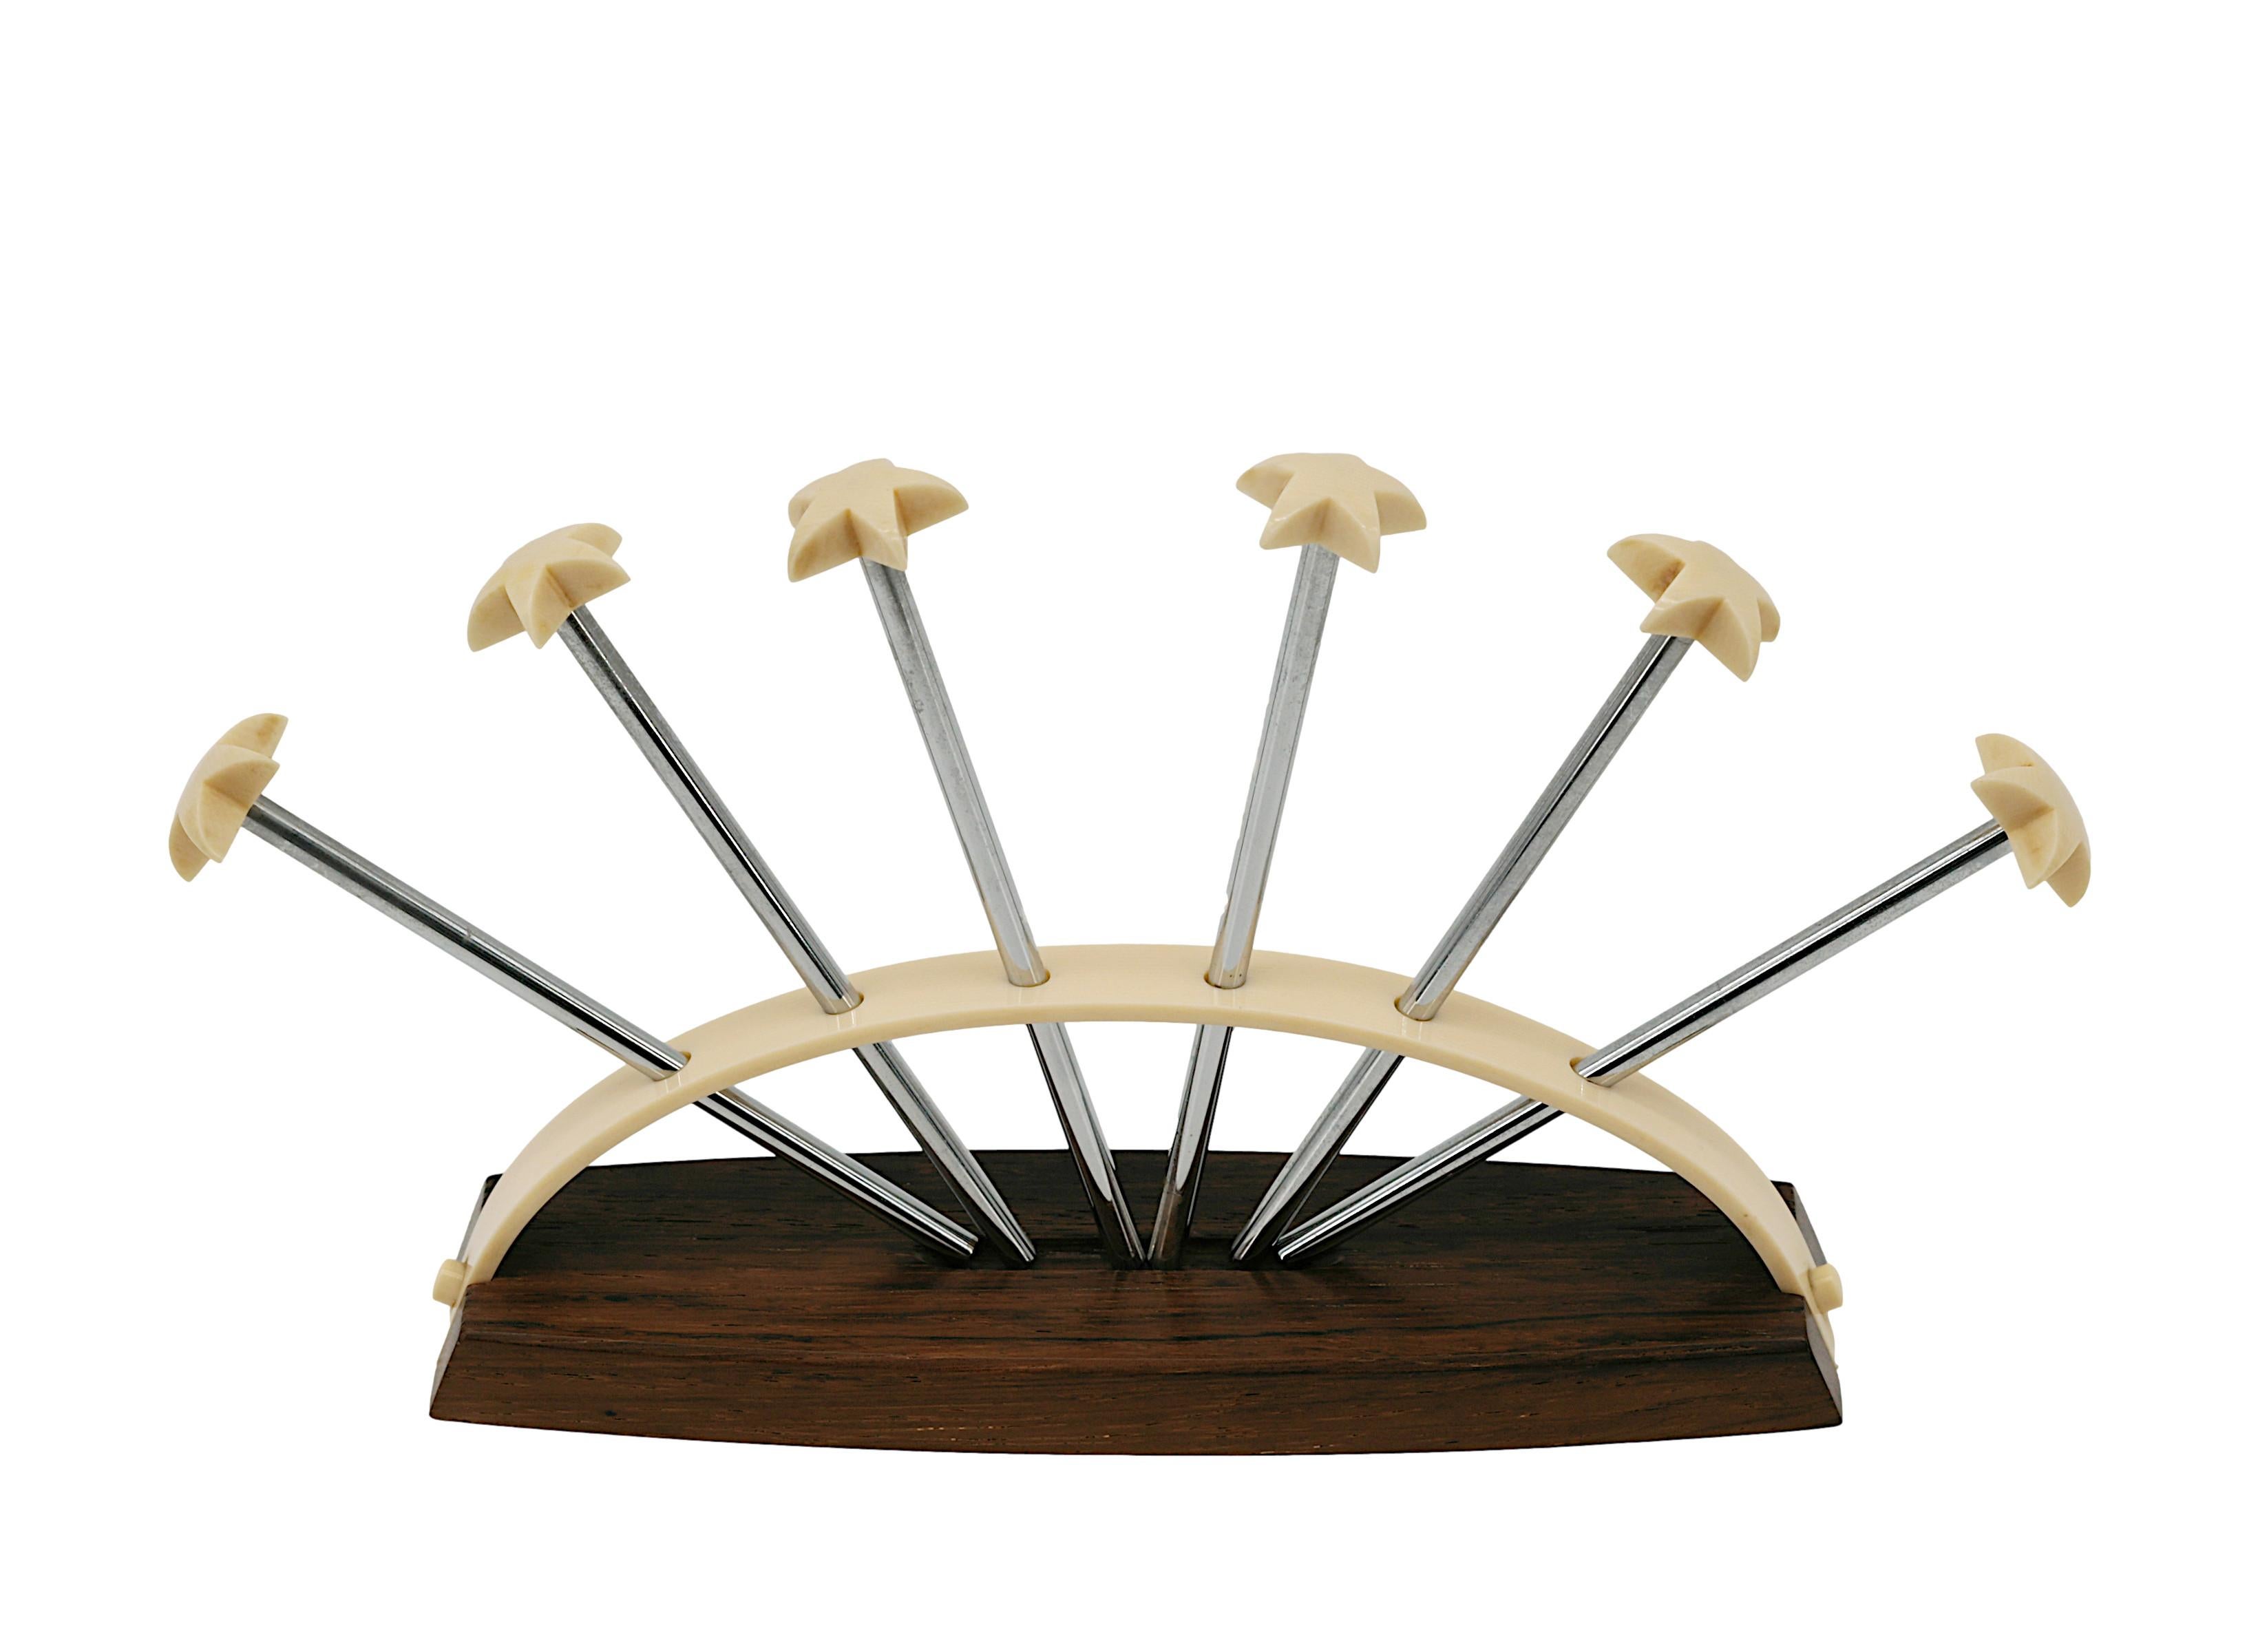 French Art Deco Bakelite Cocktail Stirrers, 1930s For Sale 1